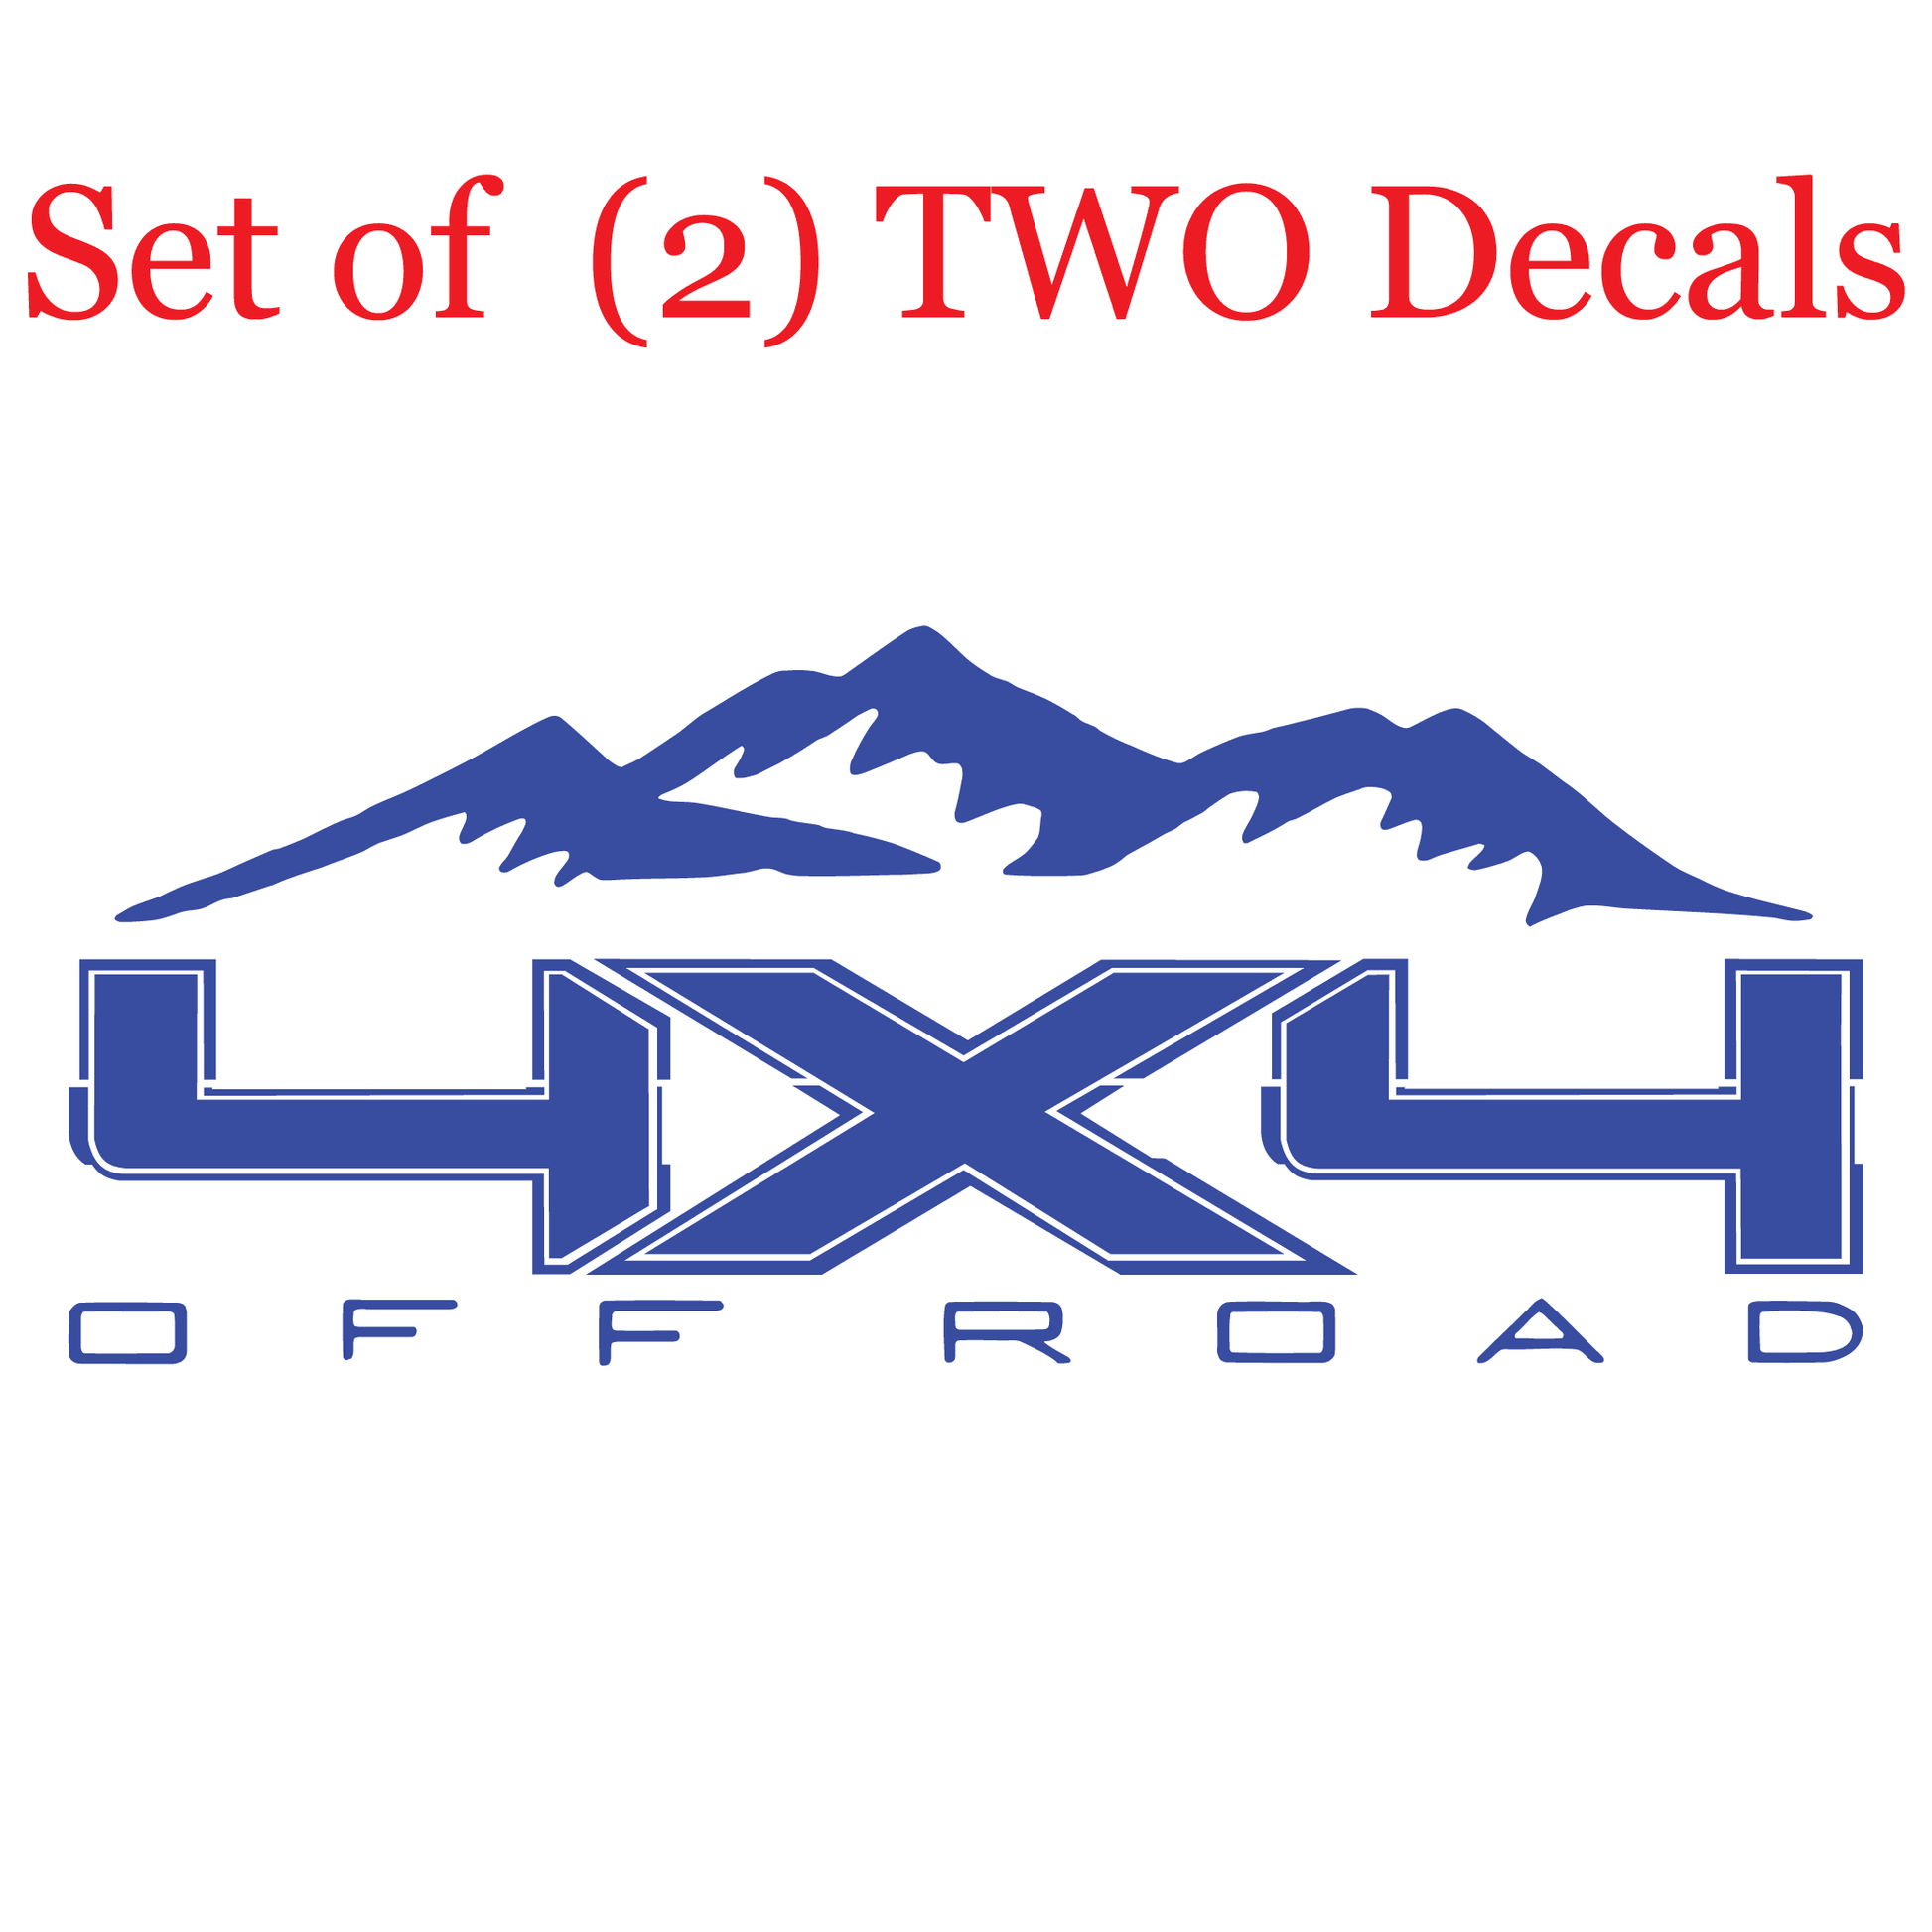 Shop Vinyl Design F-150 F-250 Trucks Replacement Bedside Decals Mountain 4 x 4 Off Road #09 Vehicle decal 001 Brilliant Blue Gloss Shop Vinyl Design decals stickers